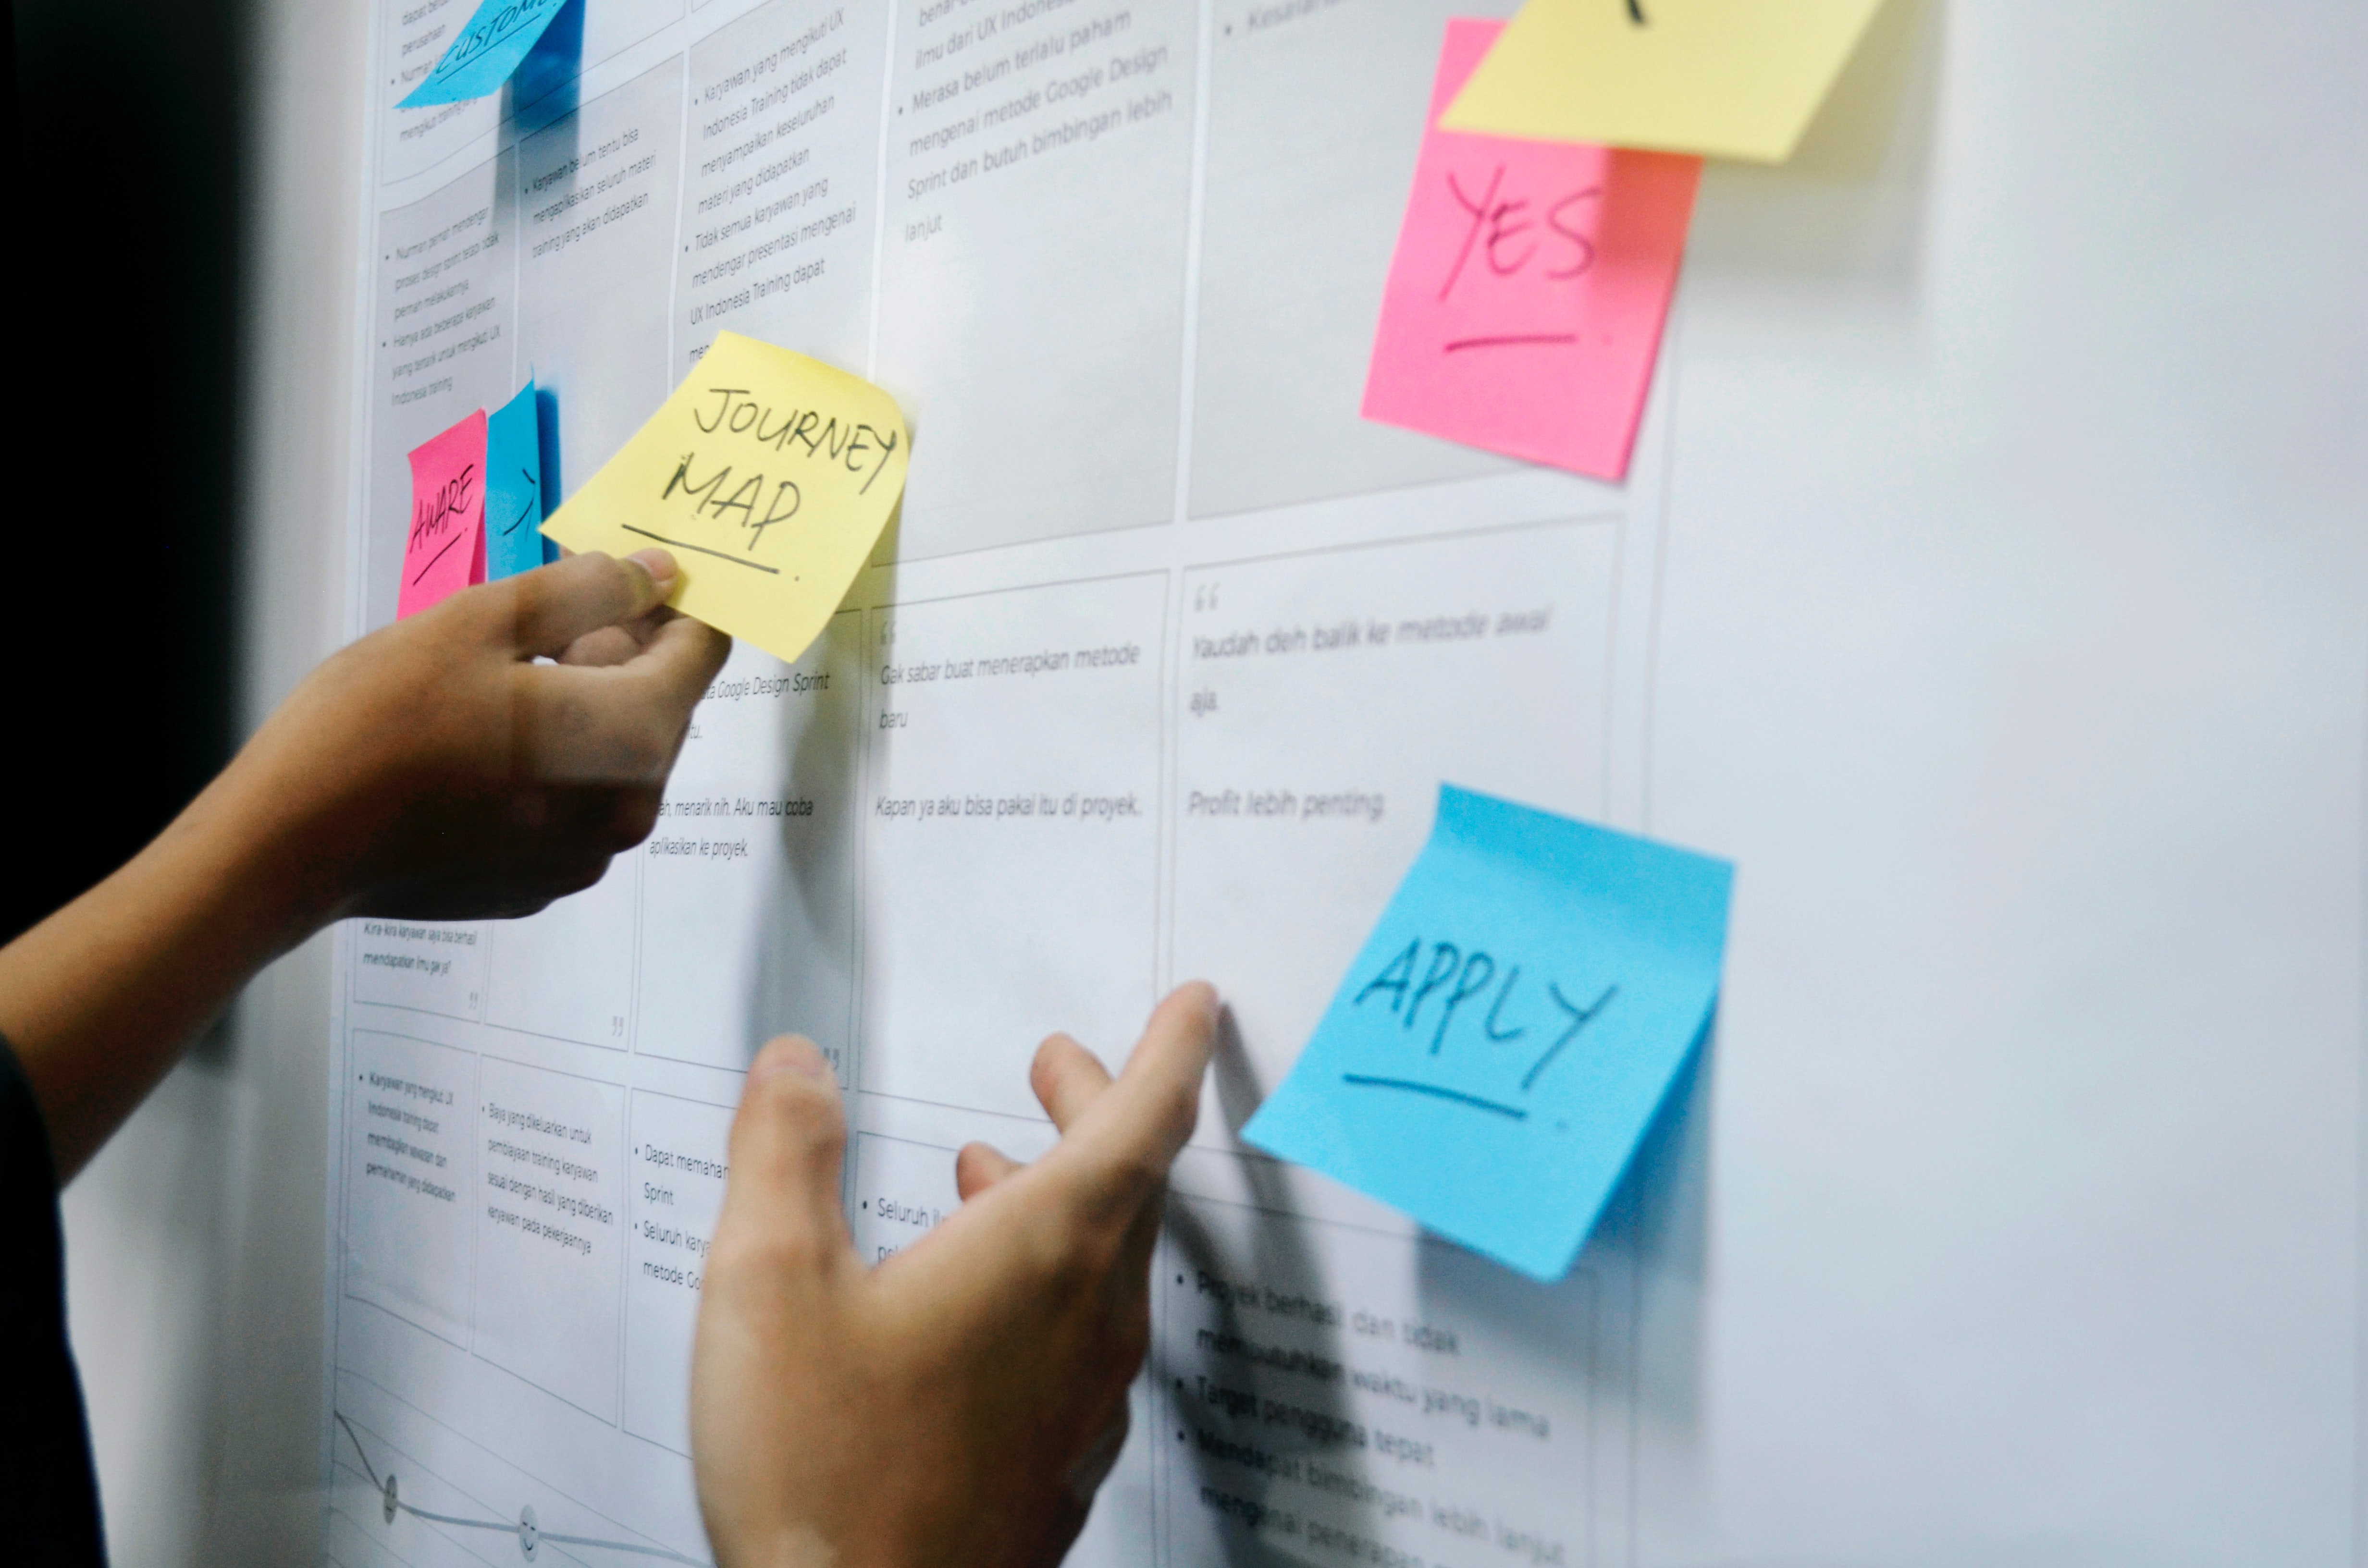 THE BENEFITS OF OPEN CUSTOMER JOURNEY MAPPING